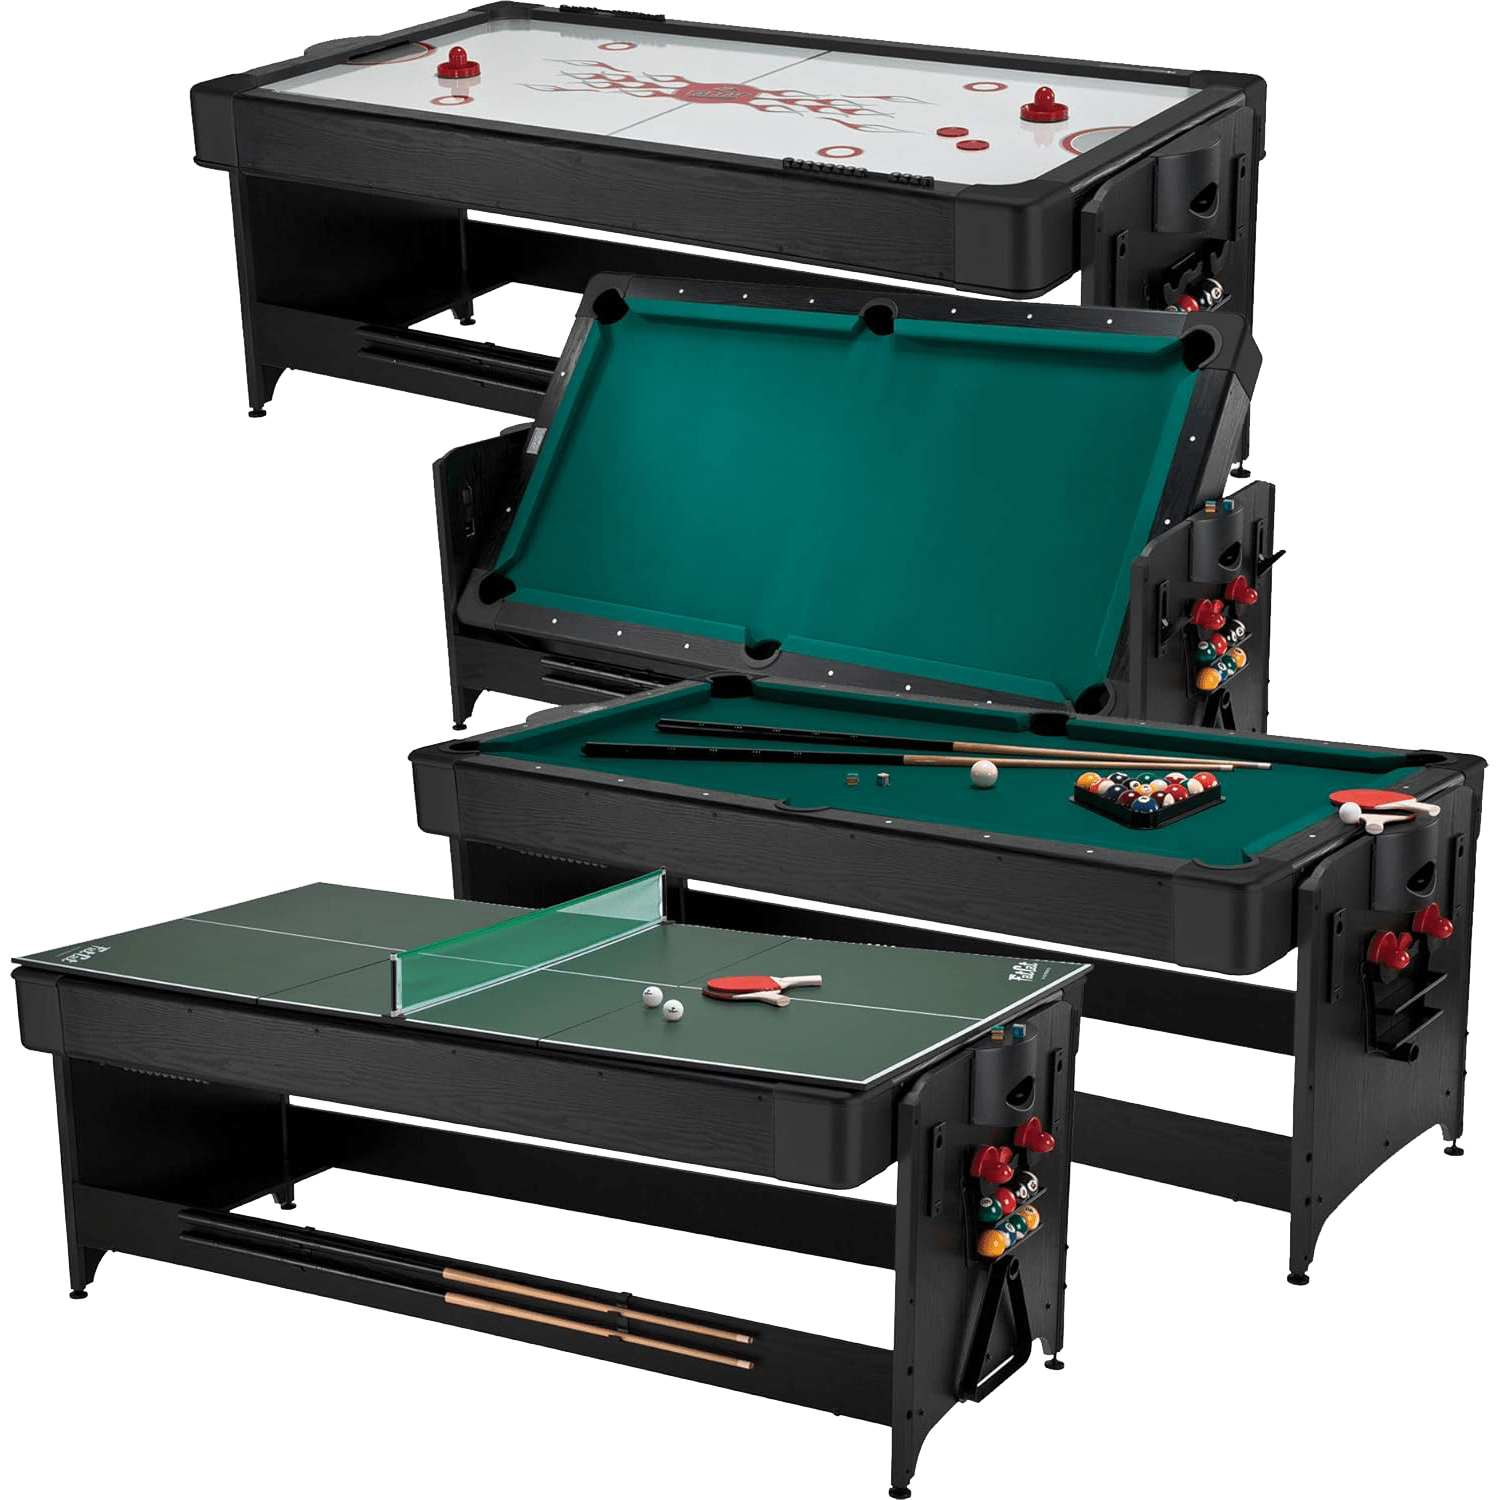 Fat Cat Original 3-in-1, 7-Foot Pockey Game Table Best Air Hockey Tables